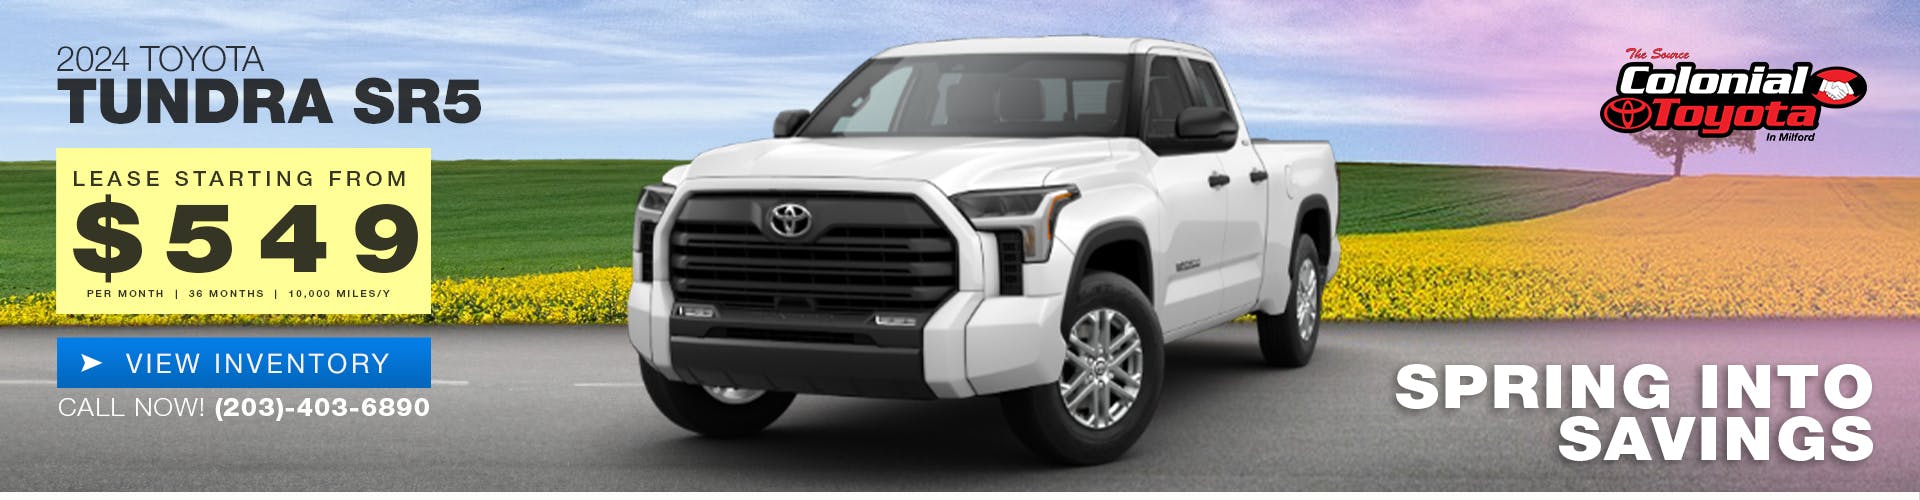 NEW 2024 TOYOTA TUNDRA SR5 Double Cab Standard Bed LEASE OFFER